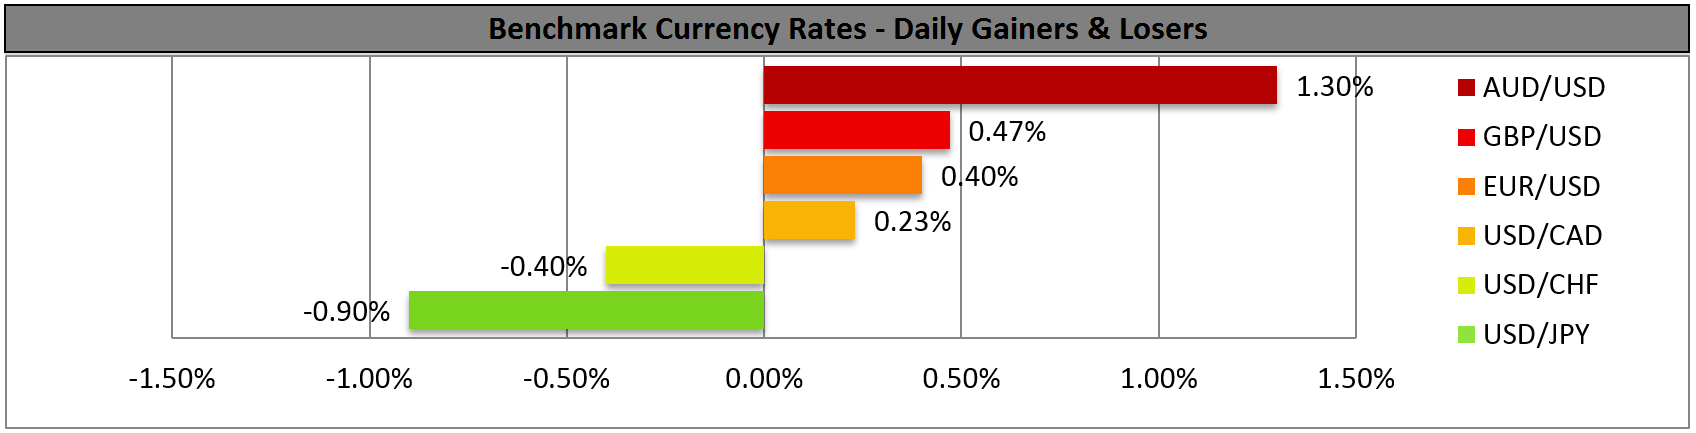 Benchmark Currency rates-Daily Gainers and Losers